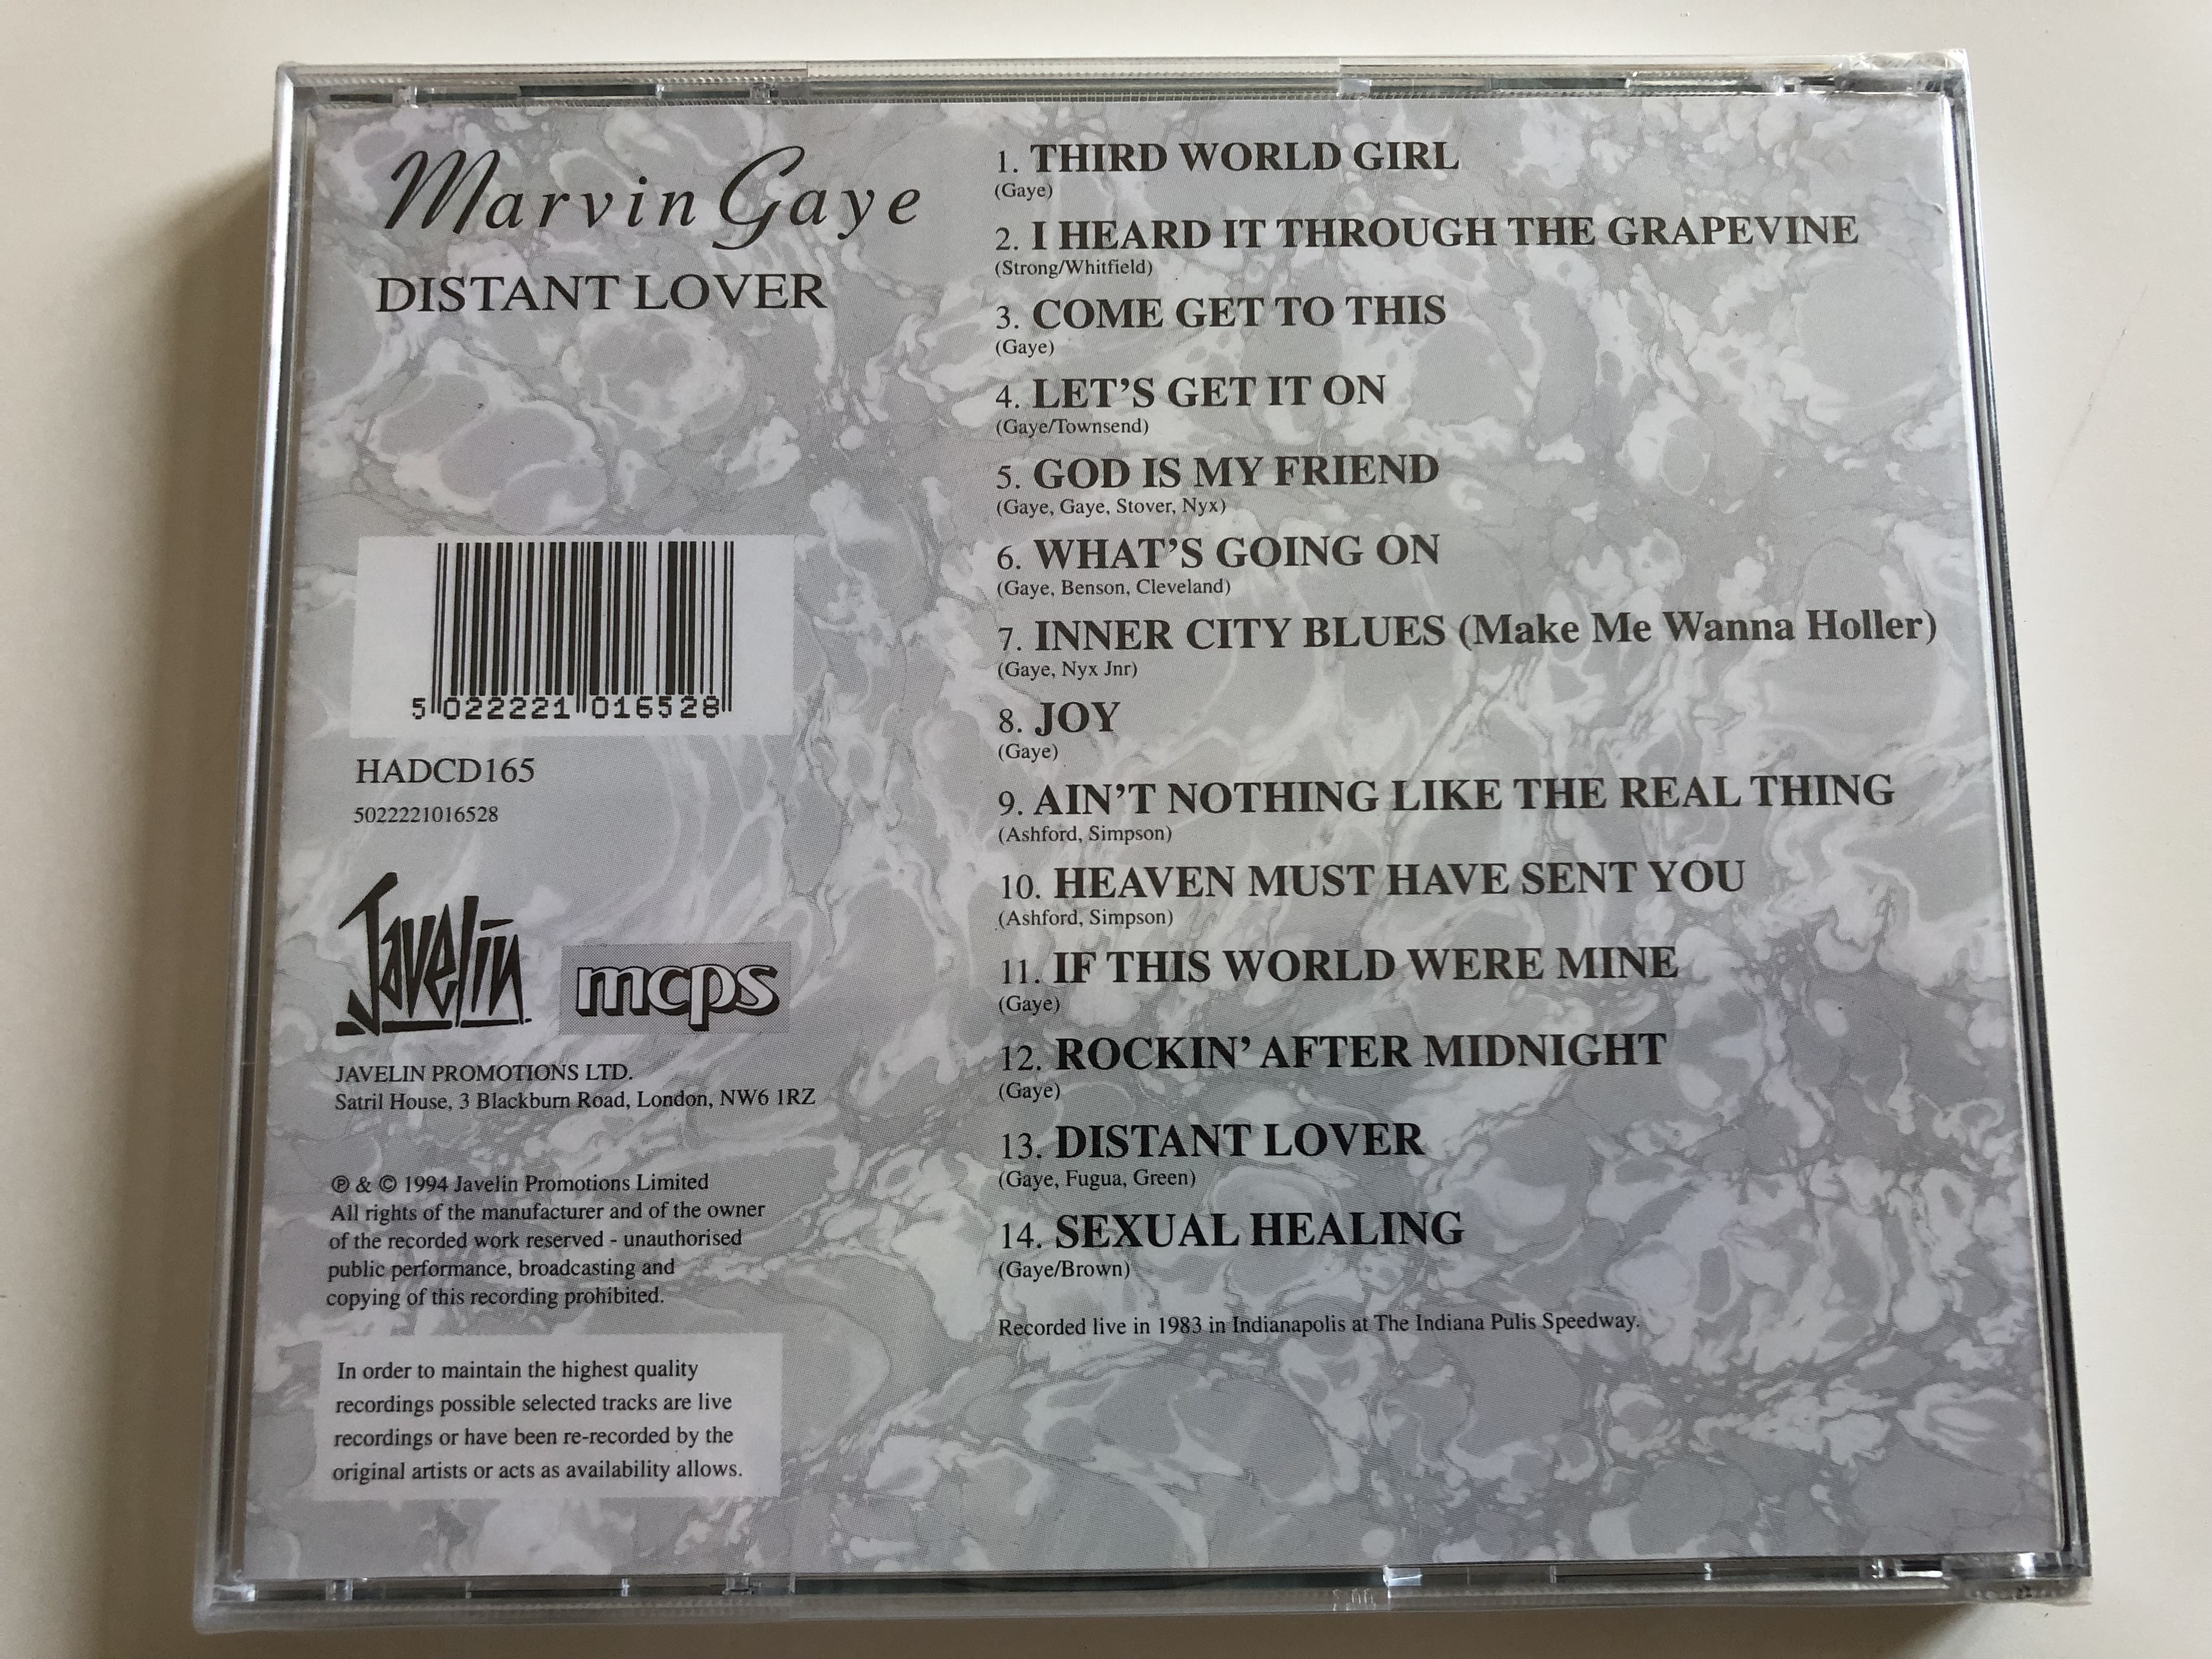 marvin-gaye-distant-lover-i-heard-it-through-the-grapevine-let-s-get-it-on-what-s-going-on-ain-t-nothing-like-the-real-thing-sexual-healing-spotlight-on-javelin-audio-cd-1994-hadcd16.jpg